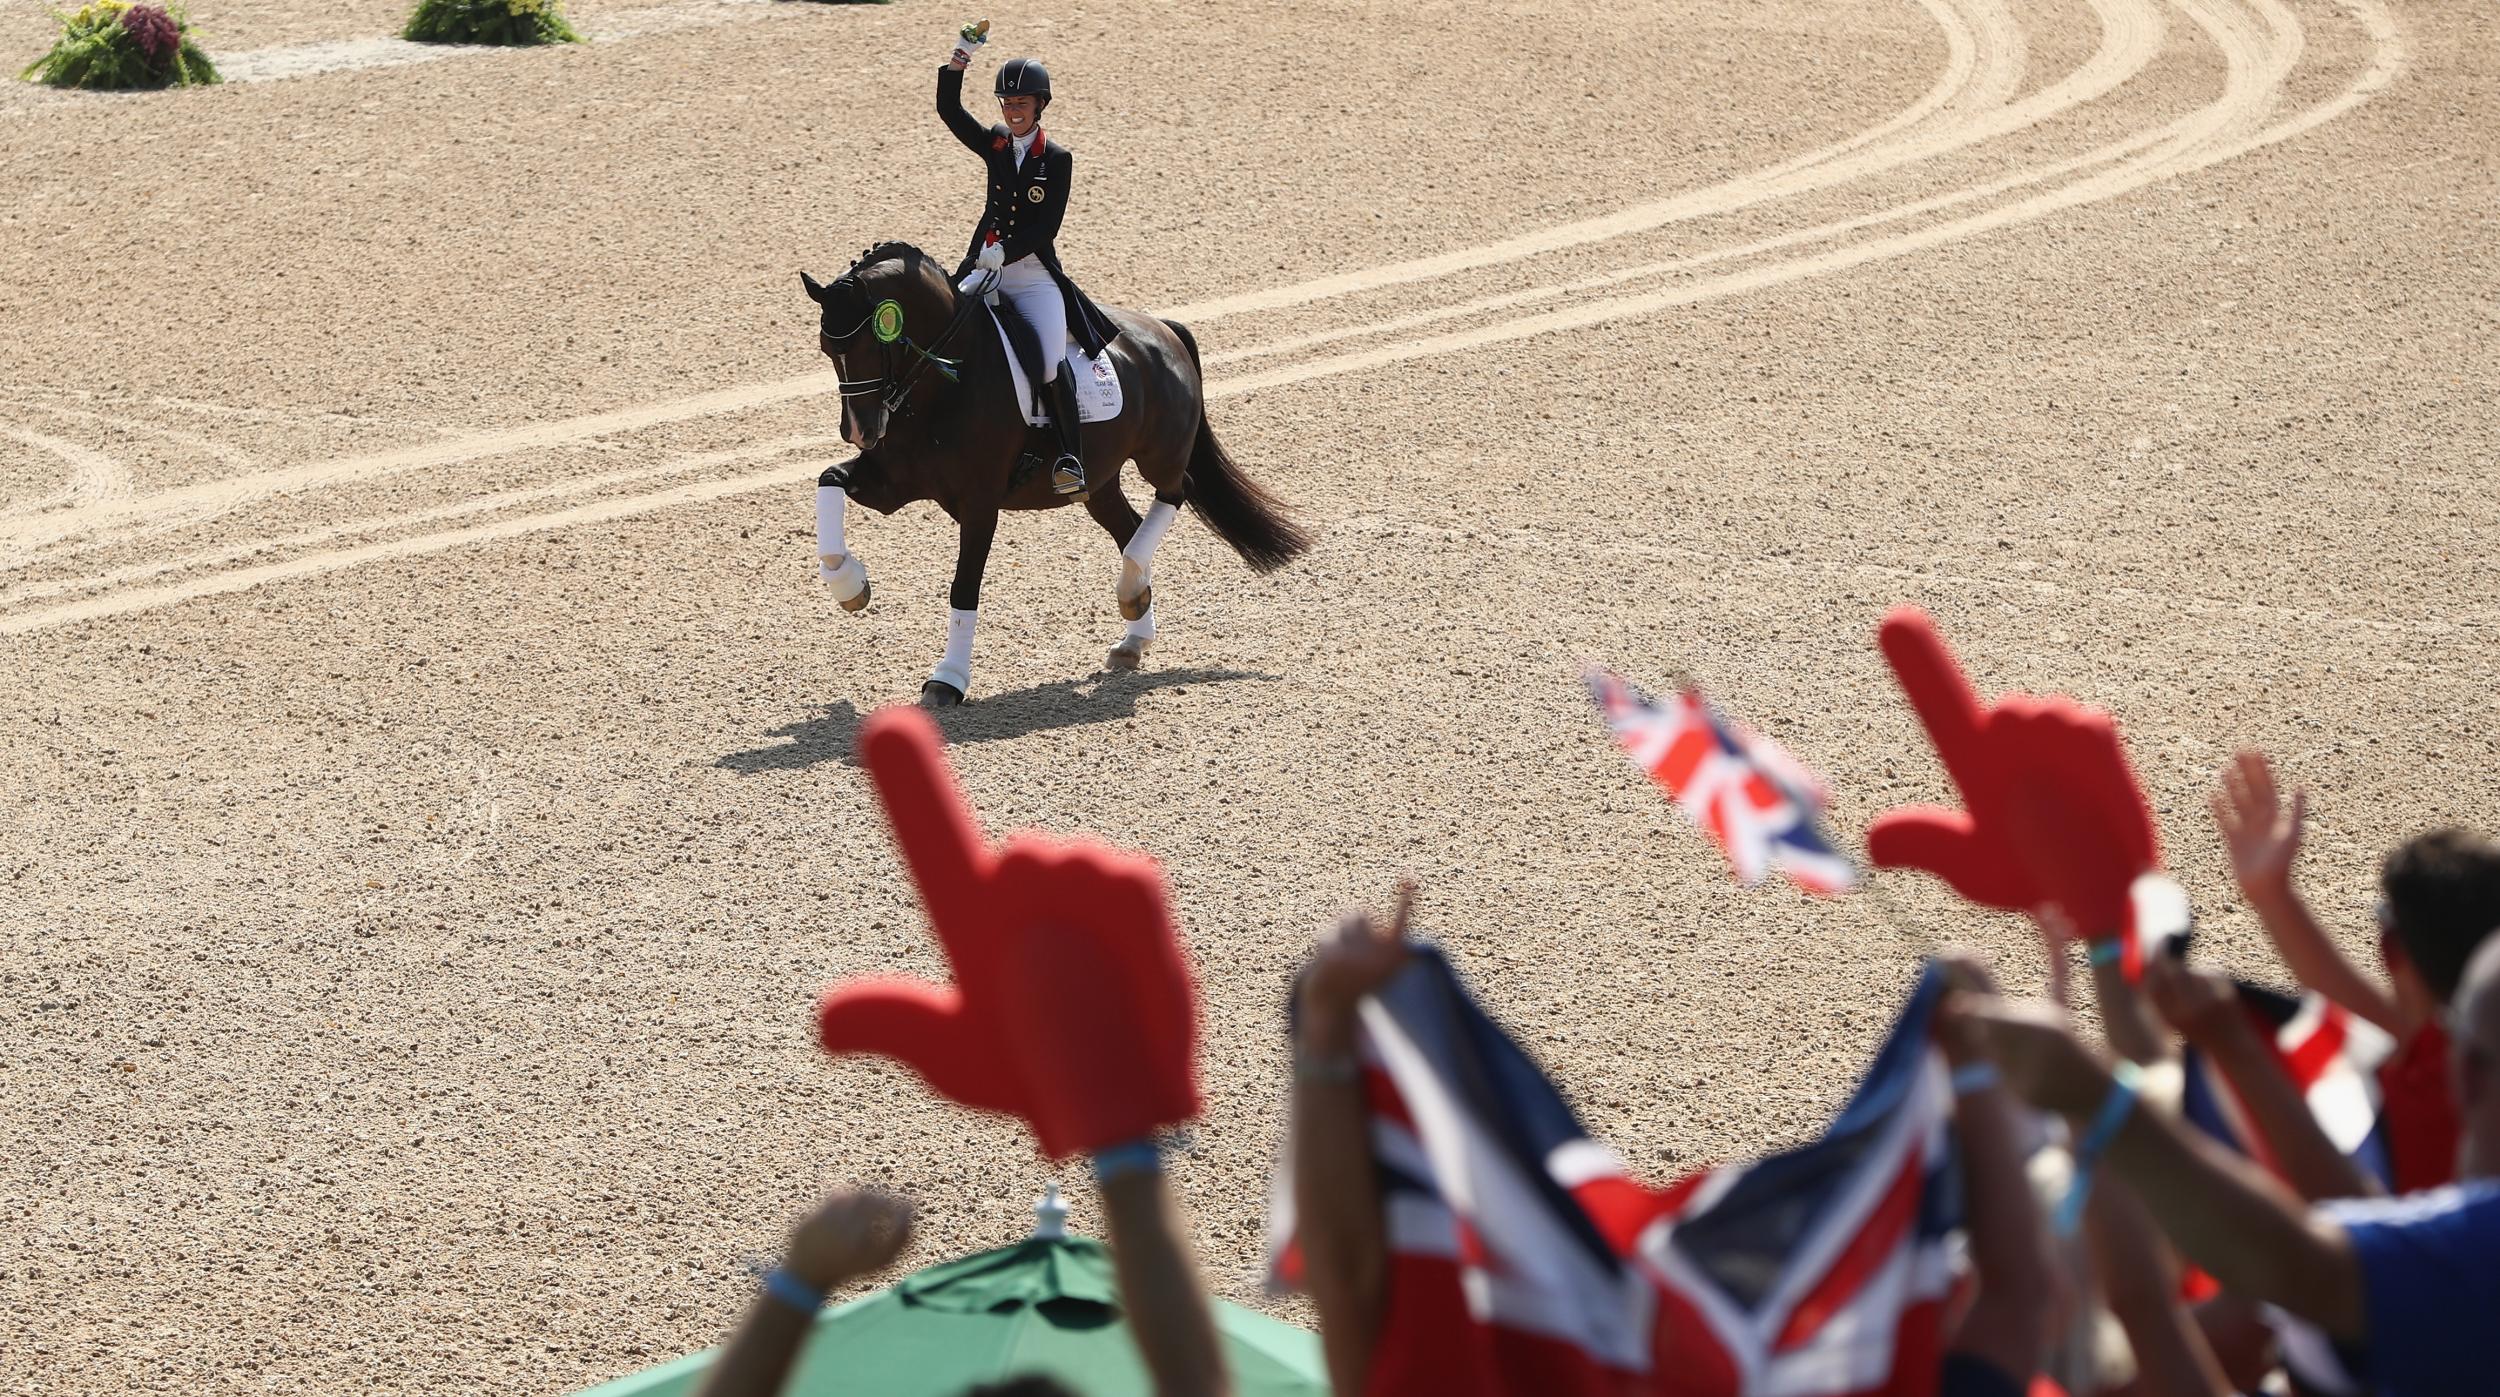 Charlotte Dujardin celebrates with the crowd